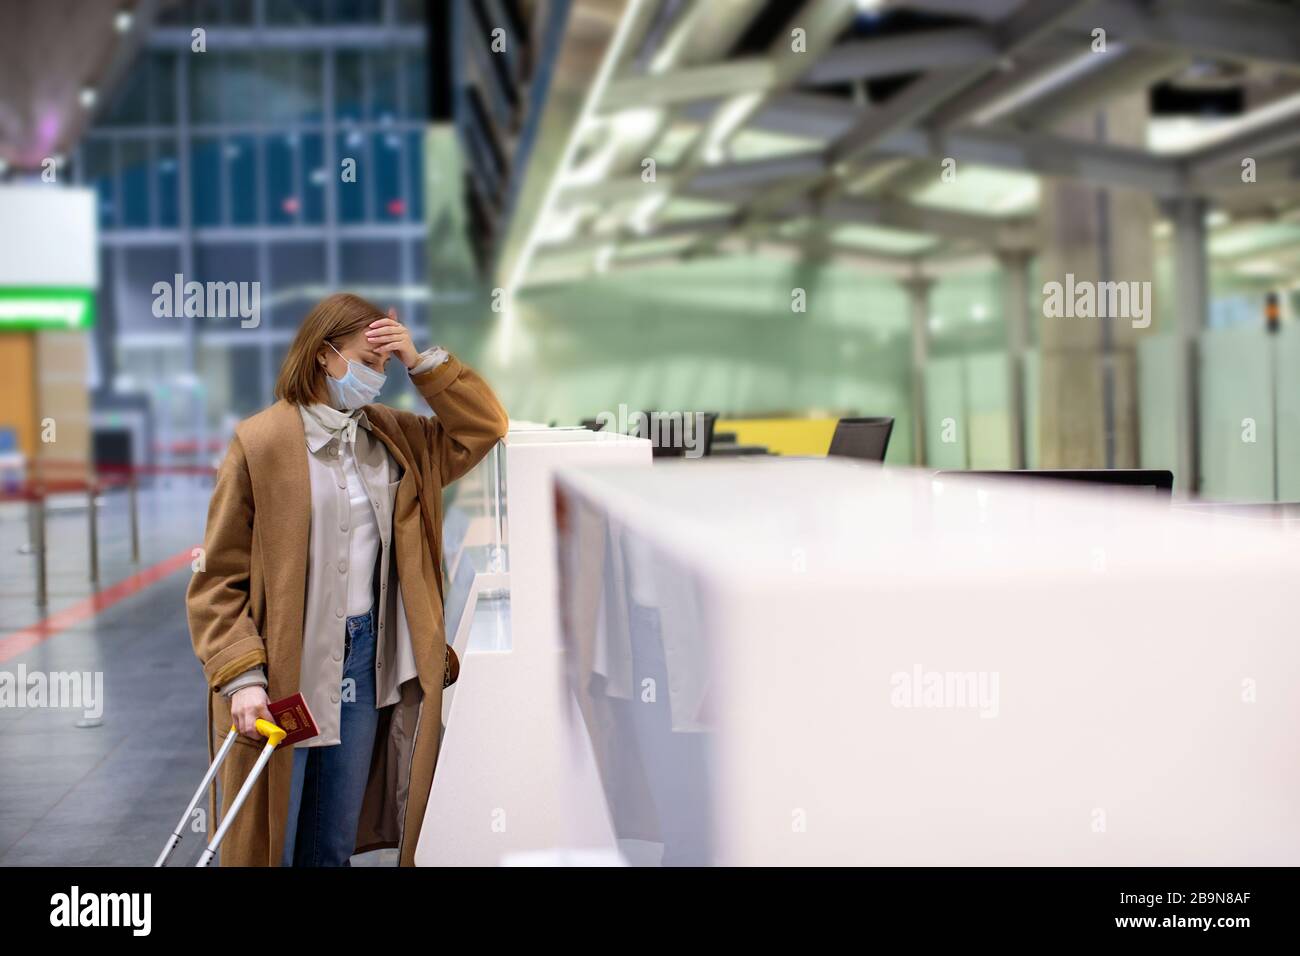 Woman with luggage upset over flight cancellation, stands at empty check-in counters at the airport terminal due to coronavirus pandemic/Covid-19 outb Stock Photo